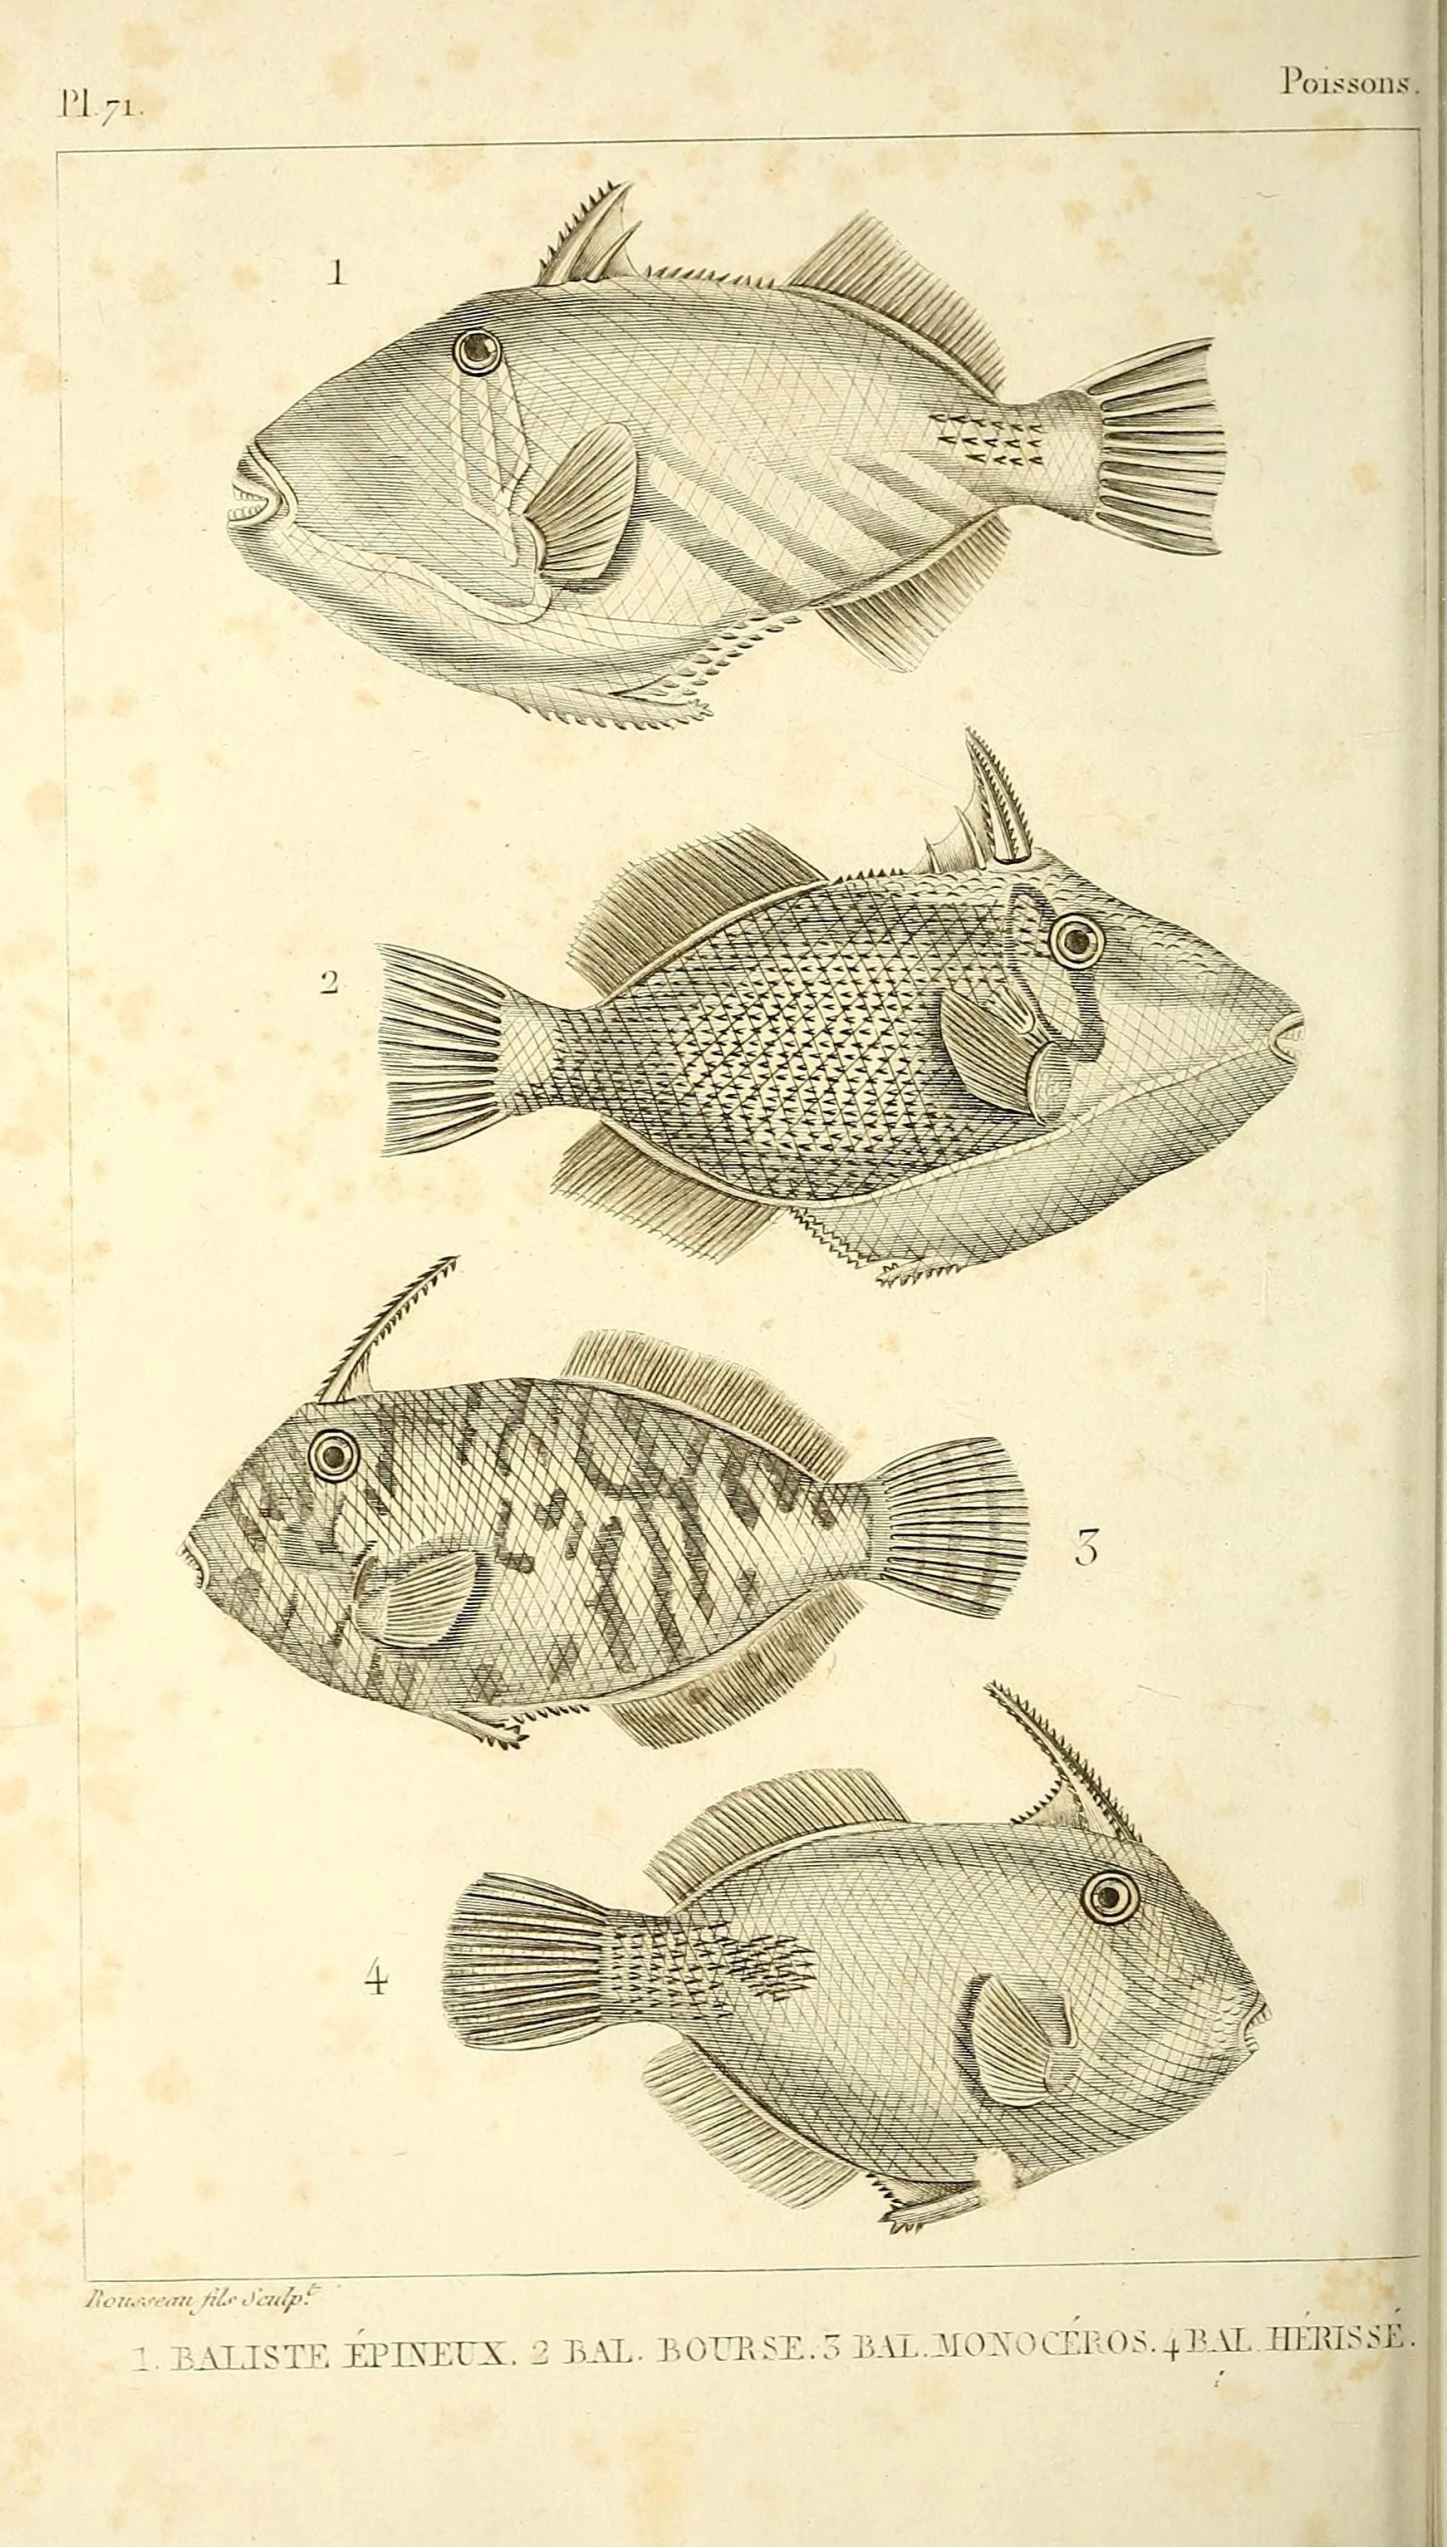 an illustration of various fish from a book